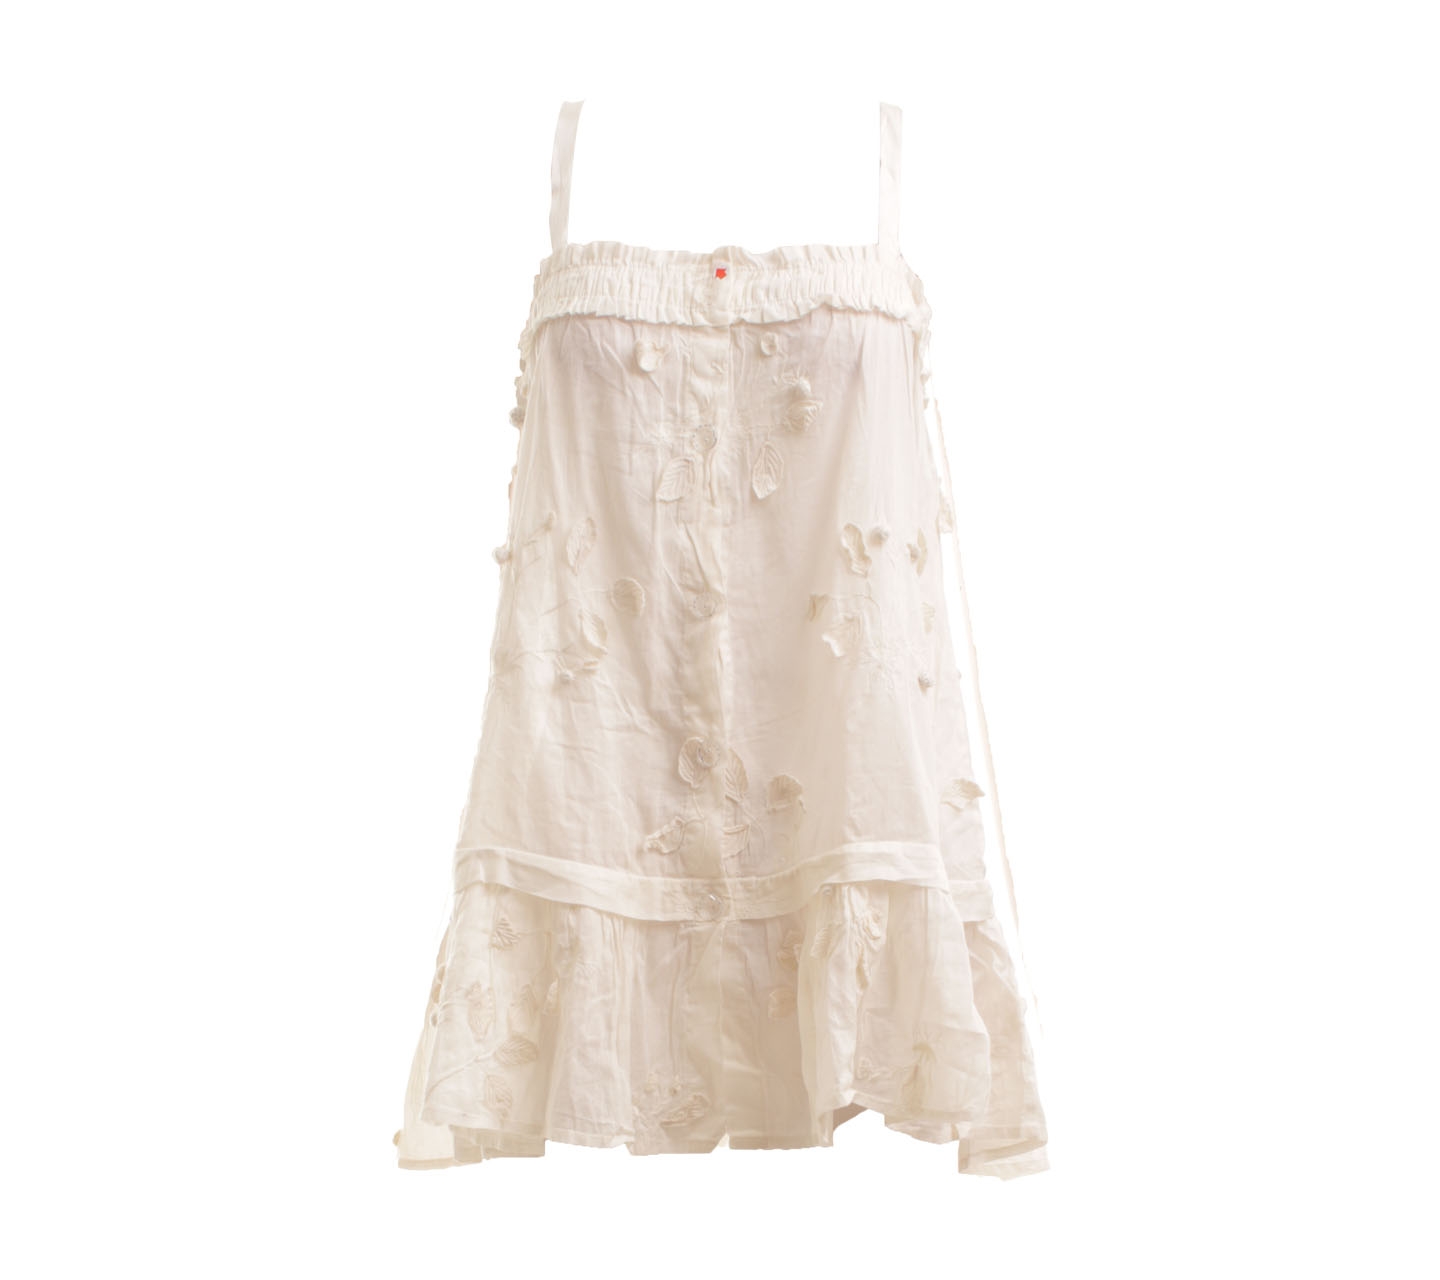 Moulinette Soeurs Patterned Lace Off White Sleeveless